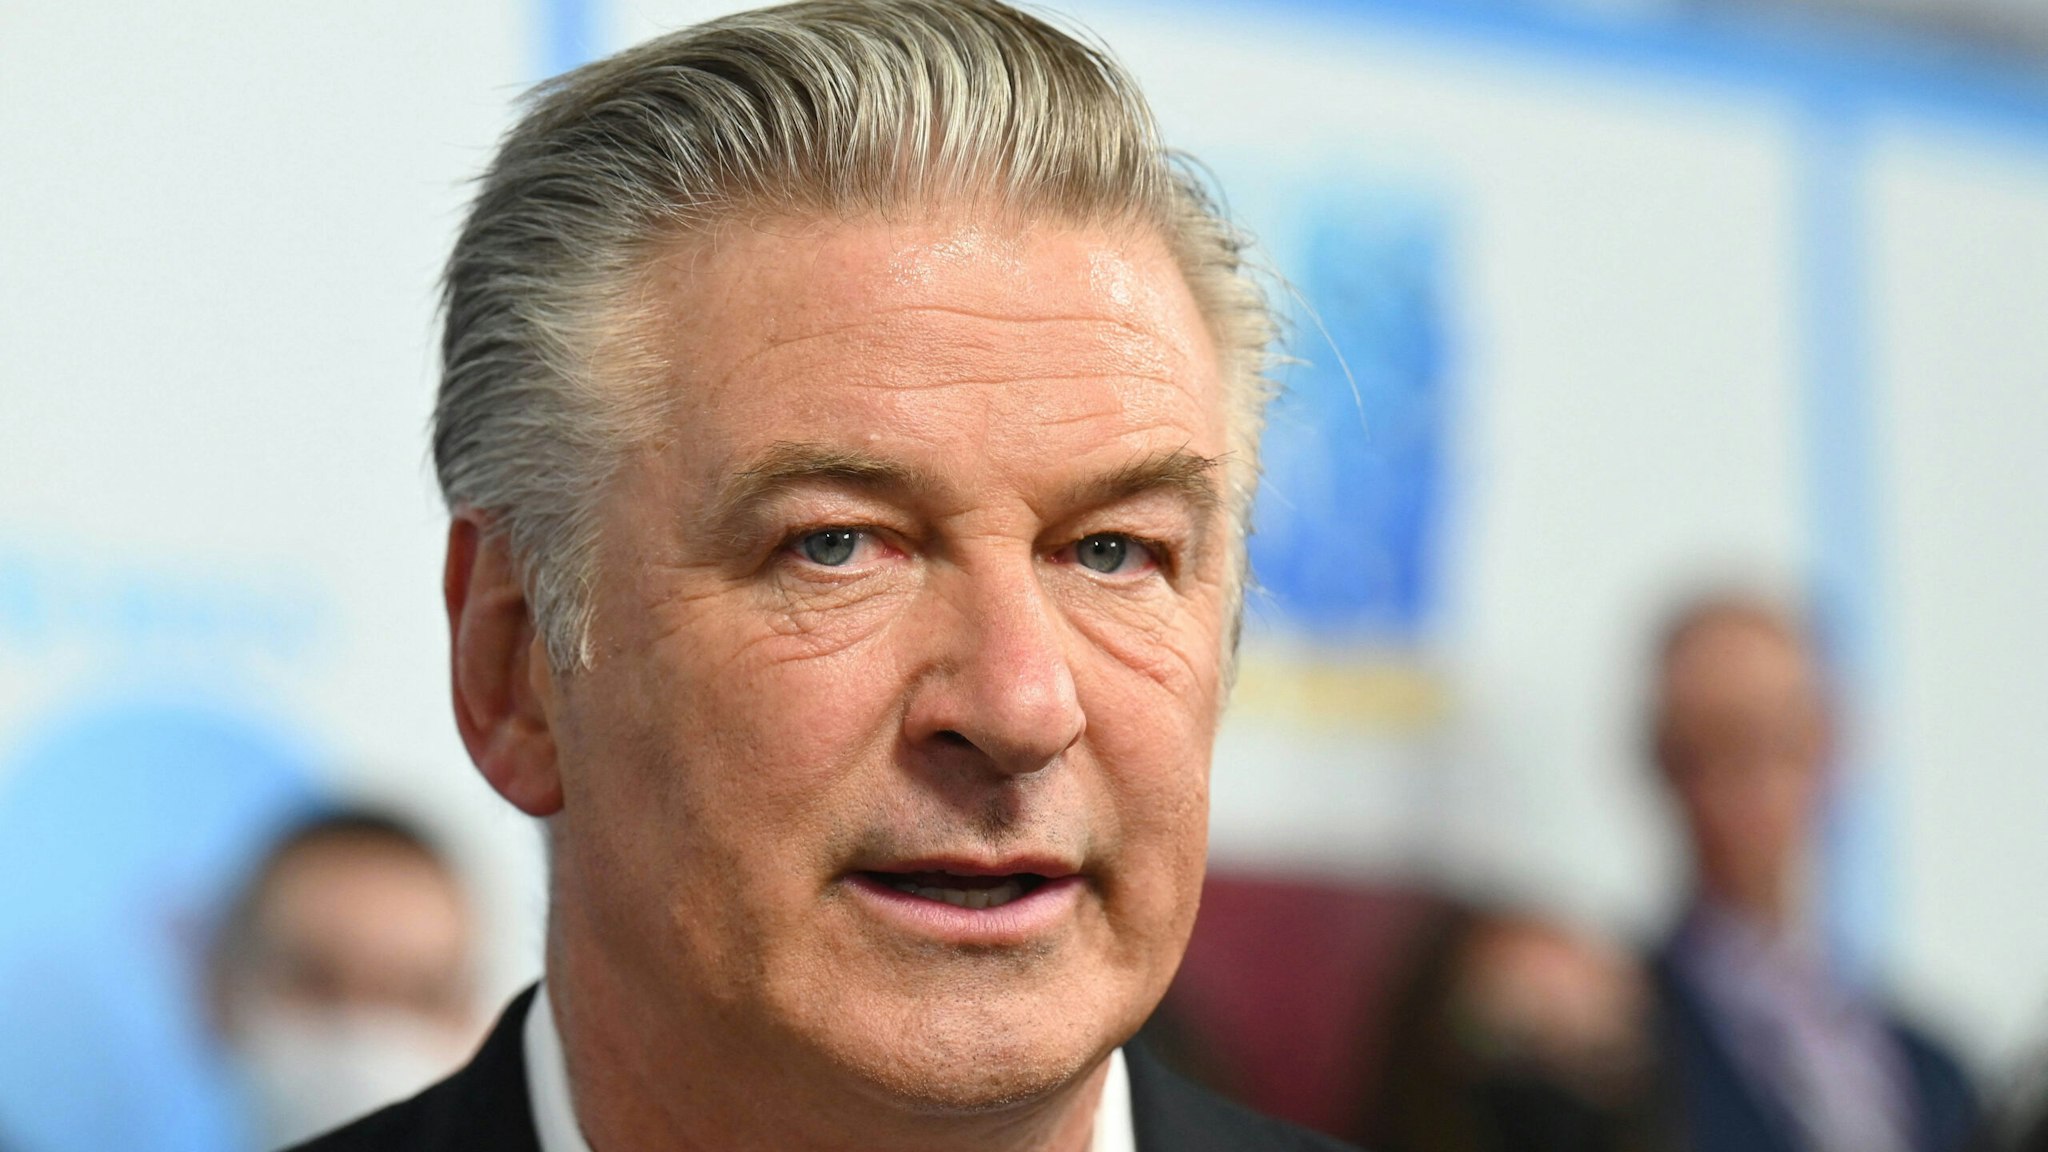 US actor Alec Baldwin attends DreamWorks Animation's "The Boss Baby: Family Business" premiere at SVA Theatre on June 22, 2021 in New York City.